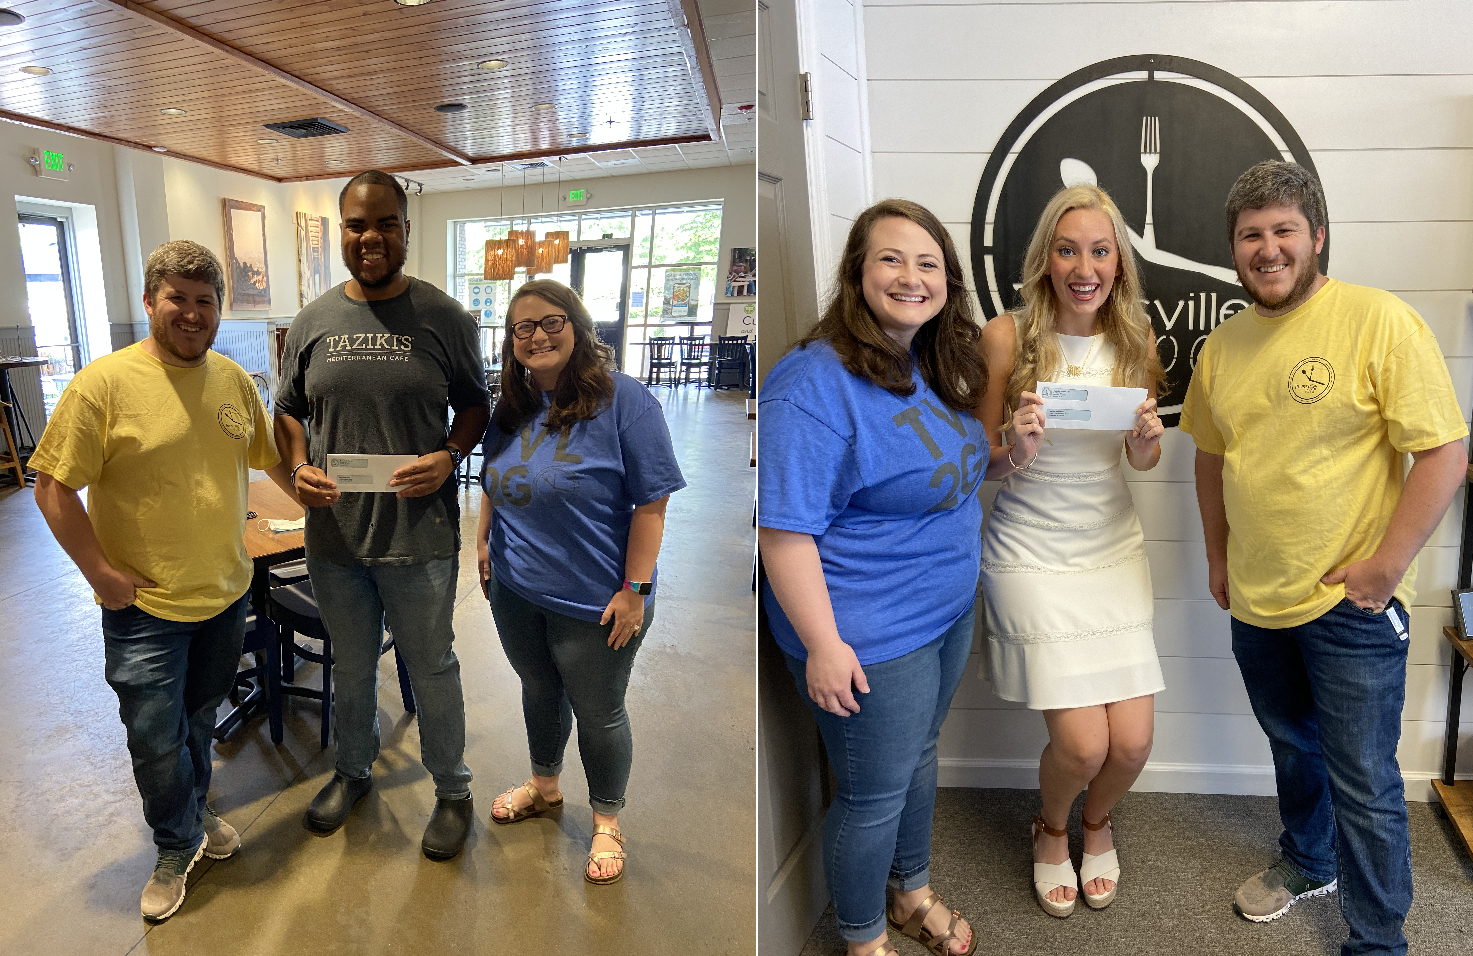 Trussville To Go announces scholarship winners in Trussville and Clay and reveals new scholarship opportunity